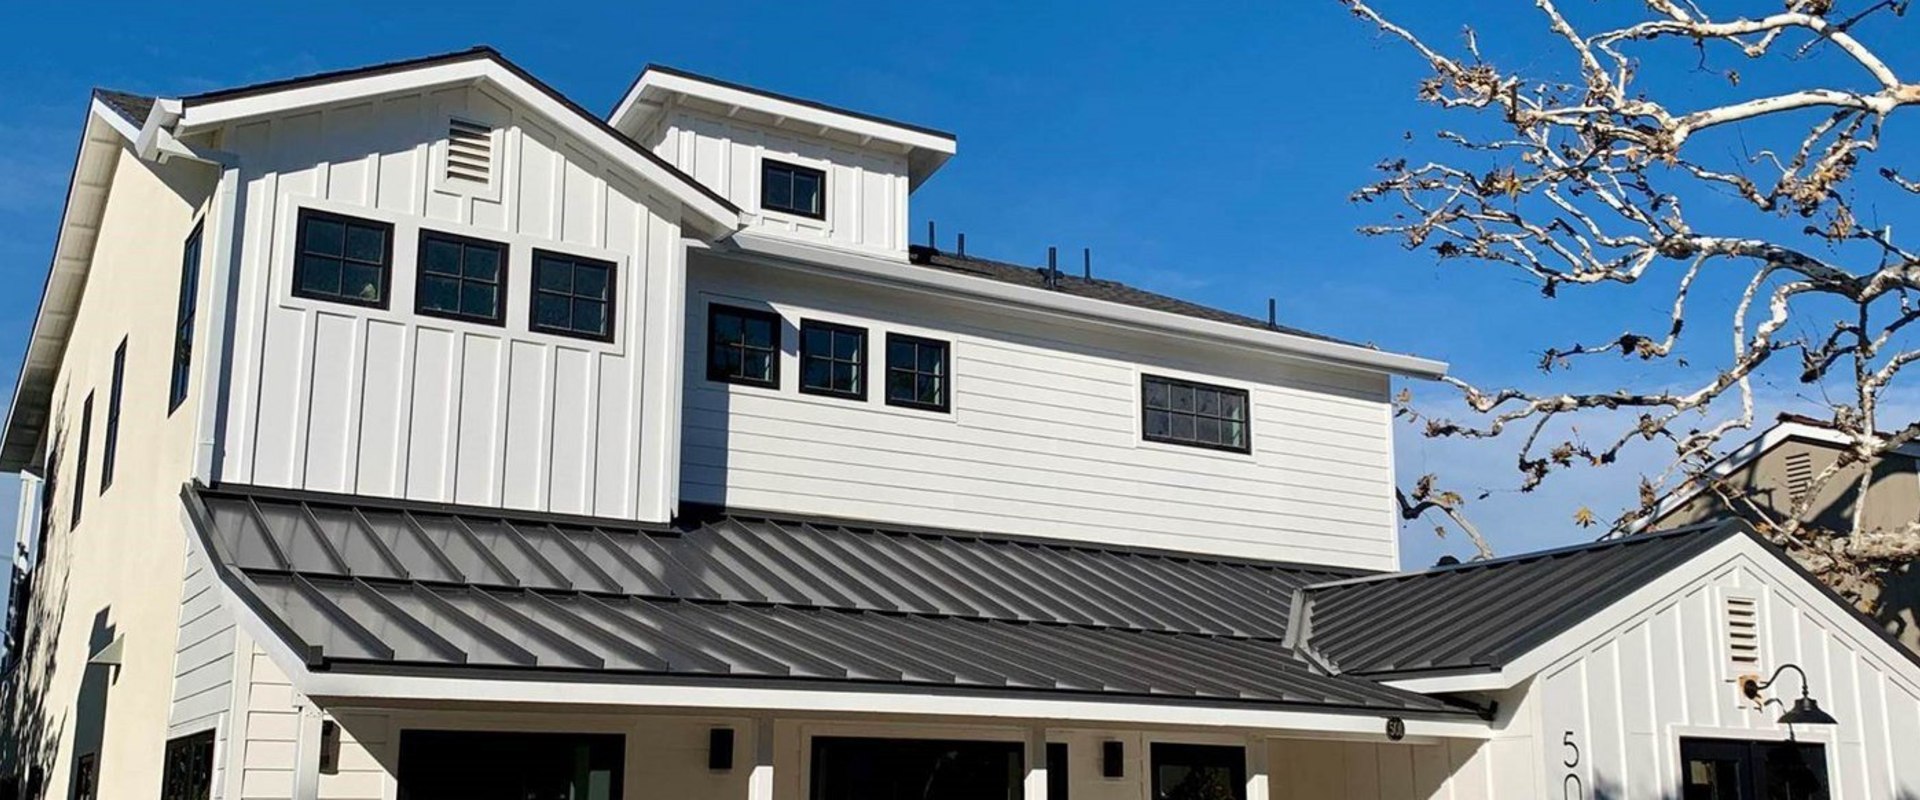 What are the two biggest concerns to a metal roof?